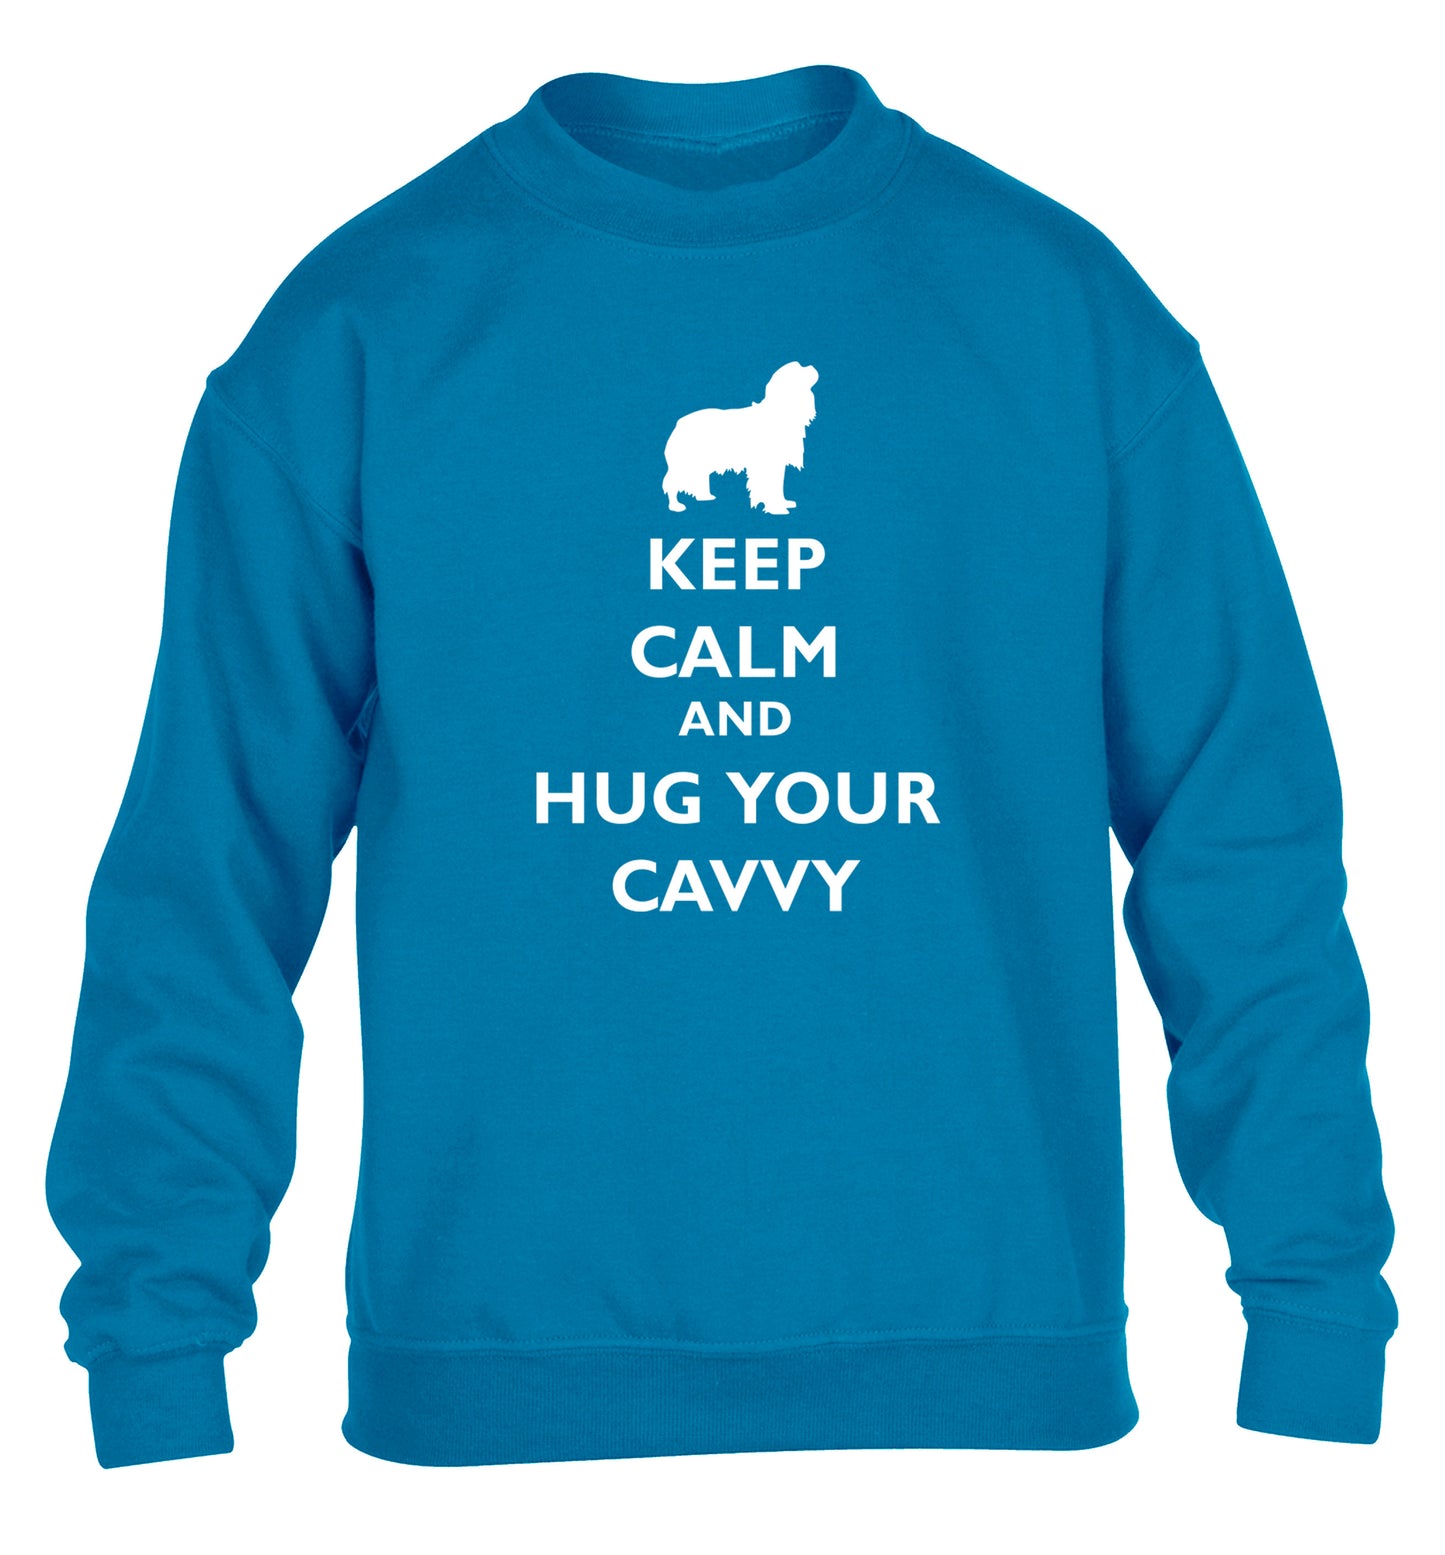 Keep calm and hug your cavvy children's blue sweater 12-13 Years